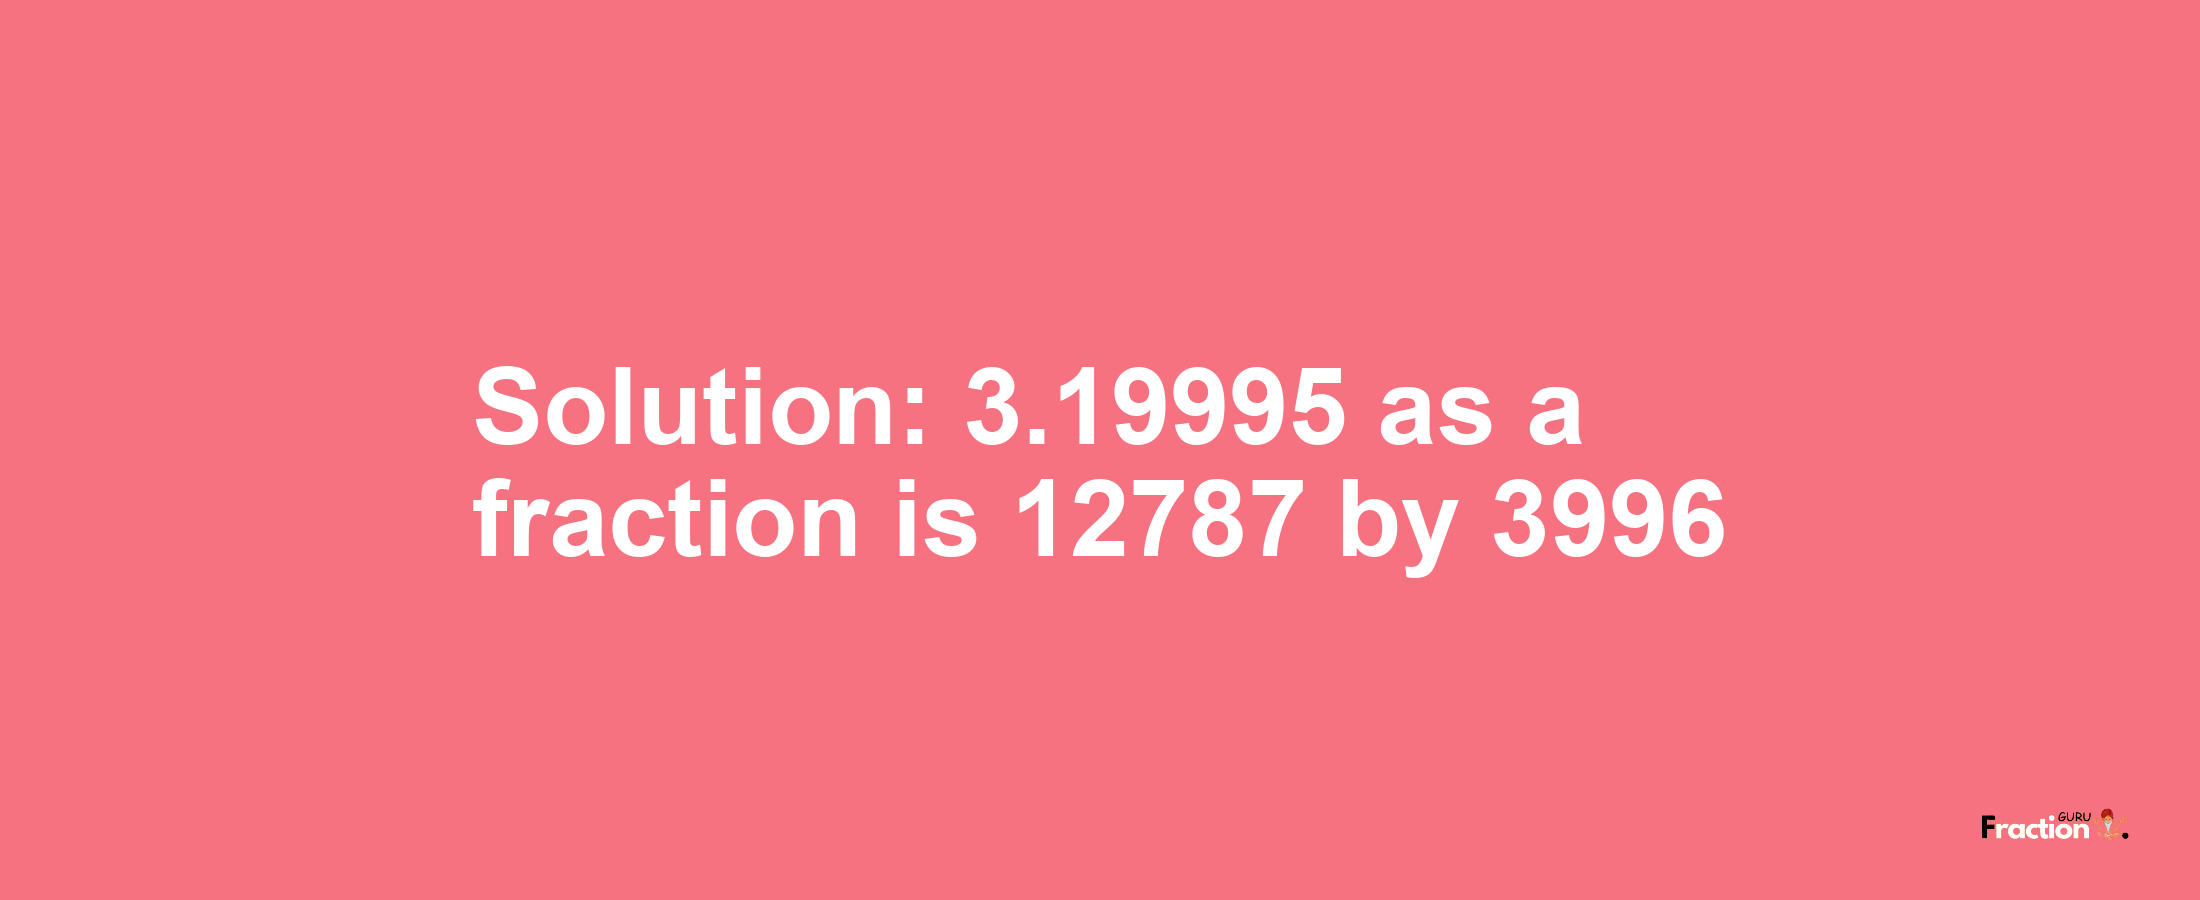 Solution:3.19995 as a fraction is 12787/3996